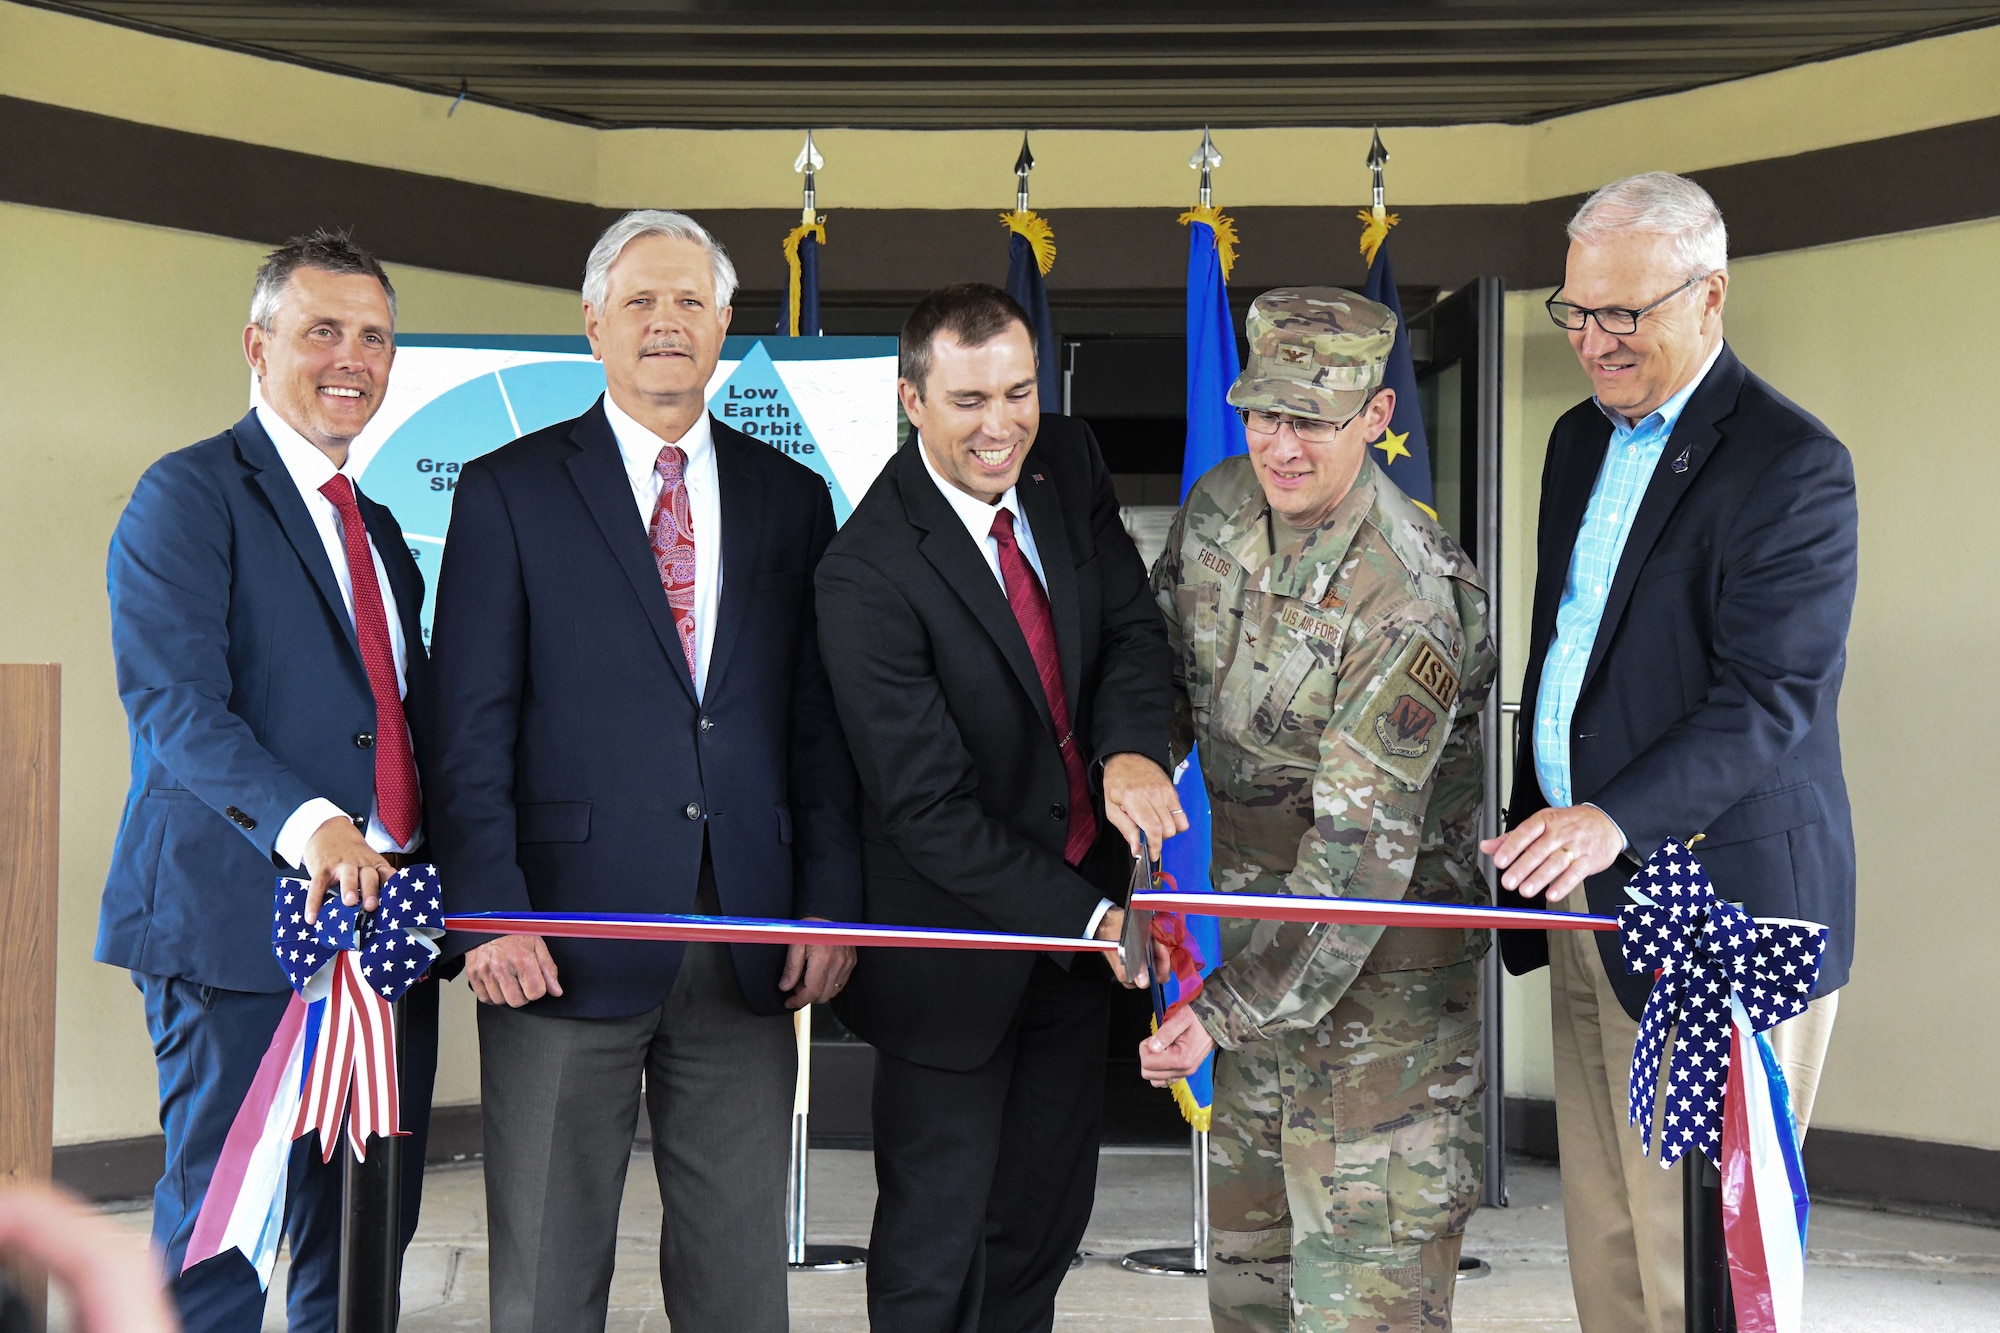 Rep. Kelly Armstrong (R-ND), left, Sen. John Hoeven (R-ND), Derek Tournear, Space Development Agency director, U.S. Air Force Col. Jeremy Fields, 319th Reconnaissance Wing vice commander, and Sen. Kevin Cramer (R-ND),right, cut the ribbon to begin construction and renovations at the new Ground Operations and Integration Center June 28, 2022, at Grand Forks Air Force Base, North Dakota. Grand Forks AFB was selected as one of two ground operation centers that will operate Space Development Agency ground entry points required to uplink and downlink data, and lead ground-to-space integration efforts. Space Development Agency is recognized as the Department of Defense’s constructive disruptor for space acquisition and will accelerate delivery of needed space-based capabilities to the joint warfighter to support terrestrial missions through development, fielding and operation of the National Defense Space Architecture. (U.S. Air Force photo by Senior Airman Ashley Richards)